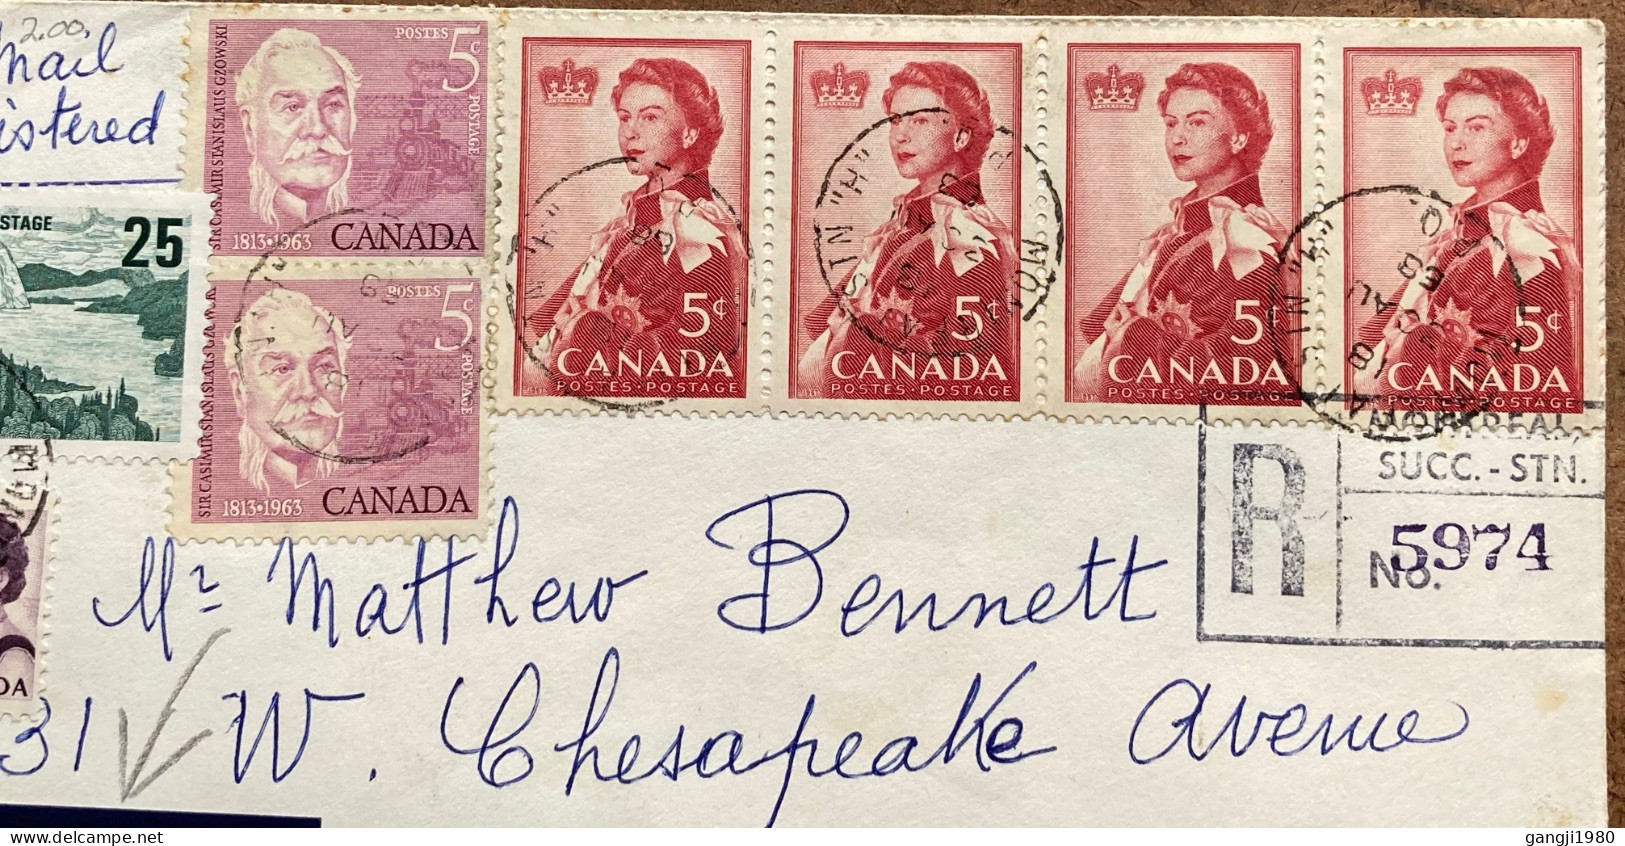 CANADA -1968, REGISTER, AIRMAIL, COVER USED TO USA, MULTI 8 STAMP, CASIMIR GZOWOSKT, RAILWAY, ROYAL QUEEN ELIZABETH, MON - Briefe U. Dokumente